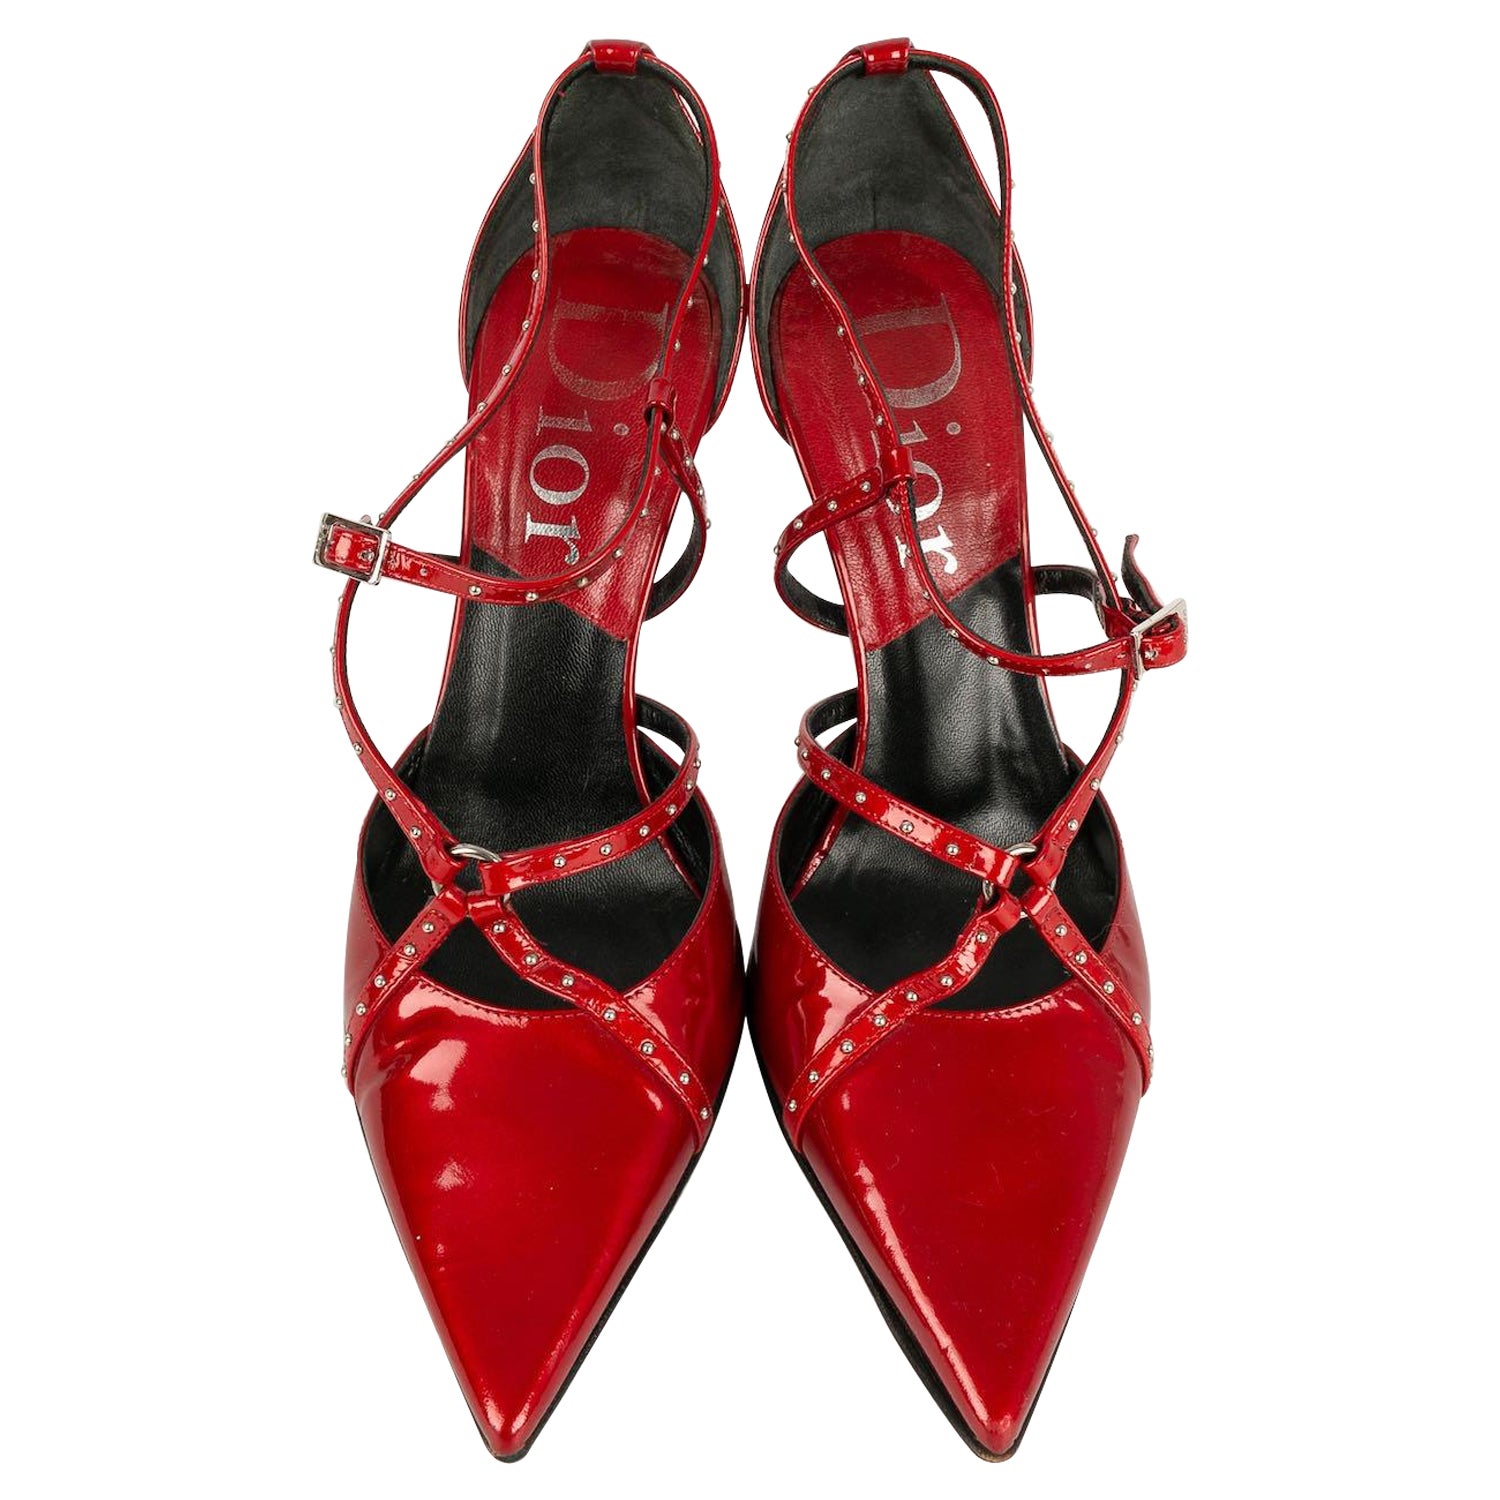 Dior Leather Pumps in Red Leather Pumps For Sale